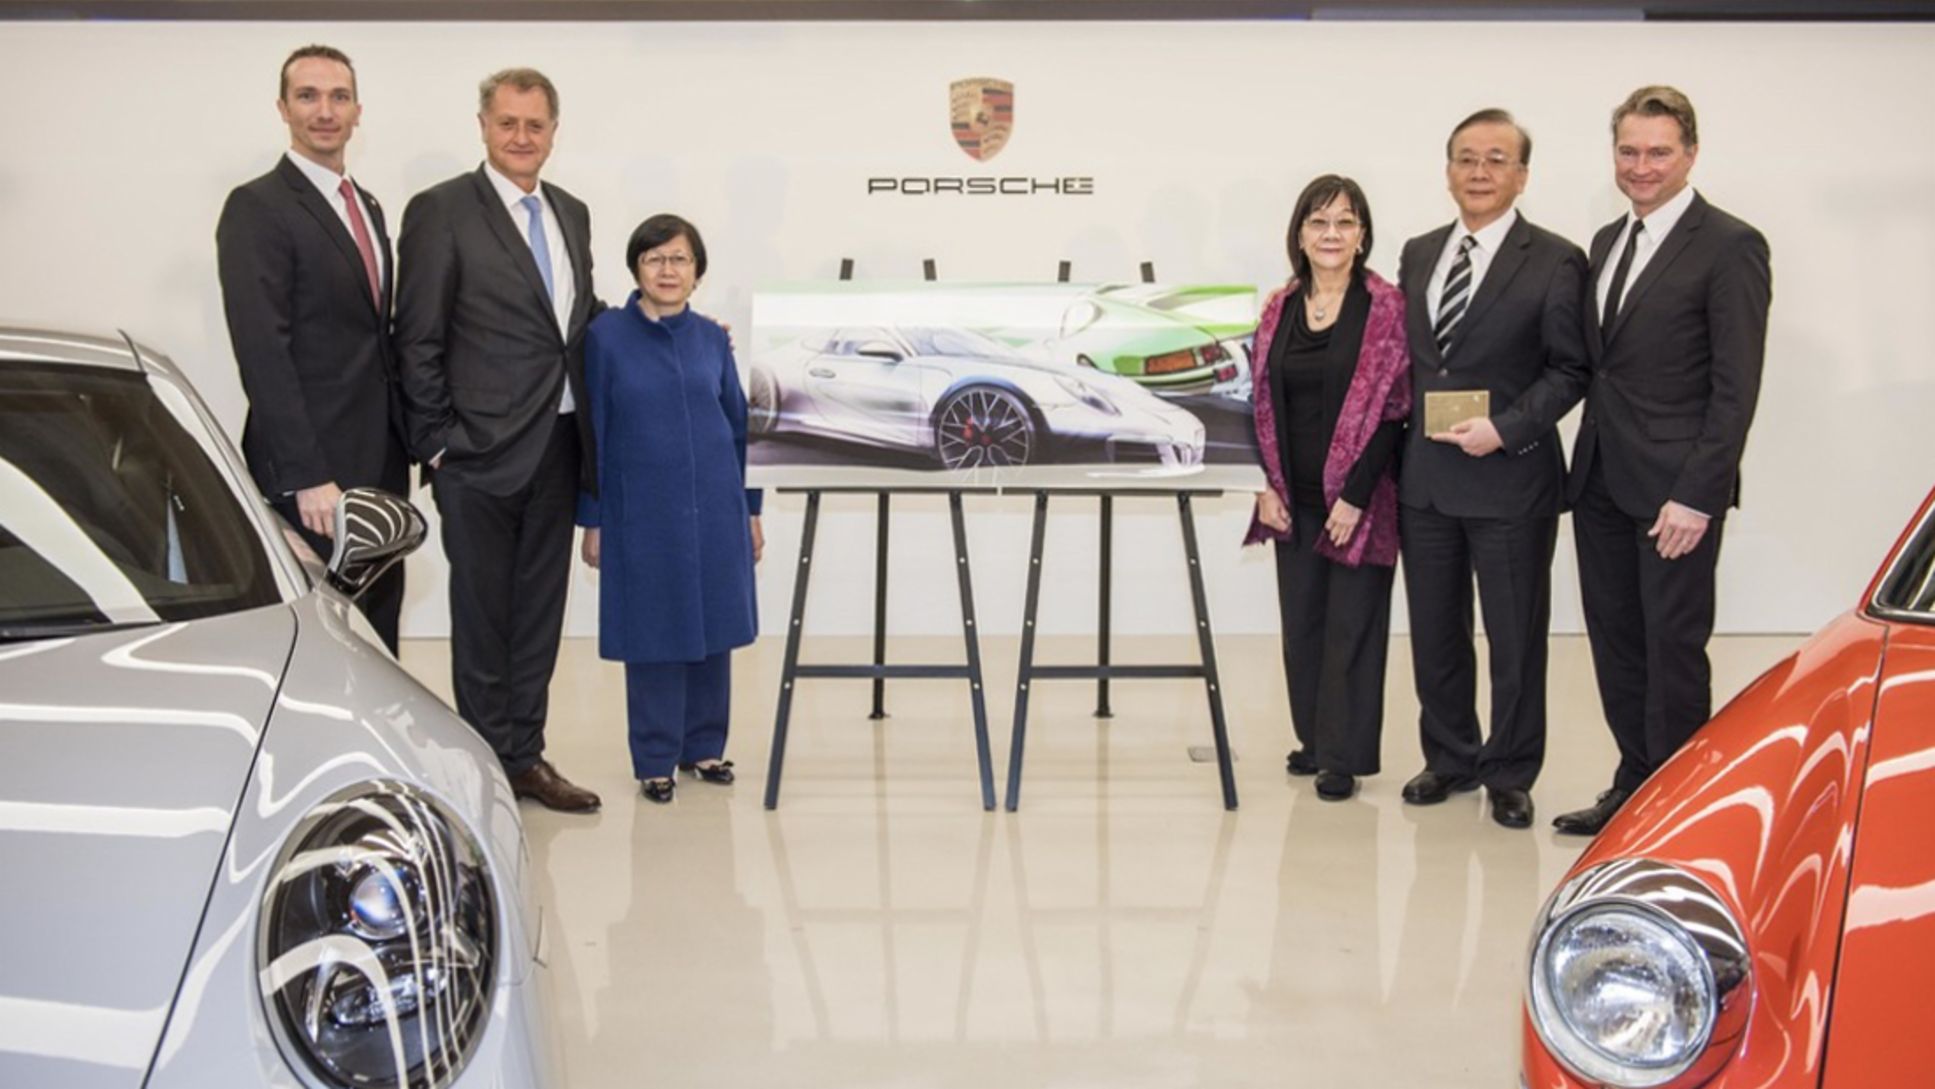 Martin Limpert, the new CEO of Porsche Taiwan; Detlev von Platen, Member of the Executive Board, Sales and Marketing, Porsche AG; Jane Tang, Chairman of Universal Motor Traders; Julie Tang, Chairman of Pan German Universal Motors Lts. Co., James Tang, Chairman of Universal Pan German Organization; Matthias Becker, Vice President Overseas and Emerging Markets; l-r, Porsche AG, 2017